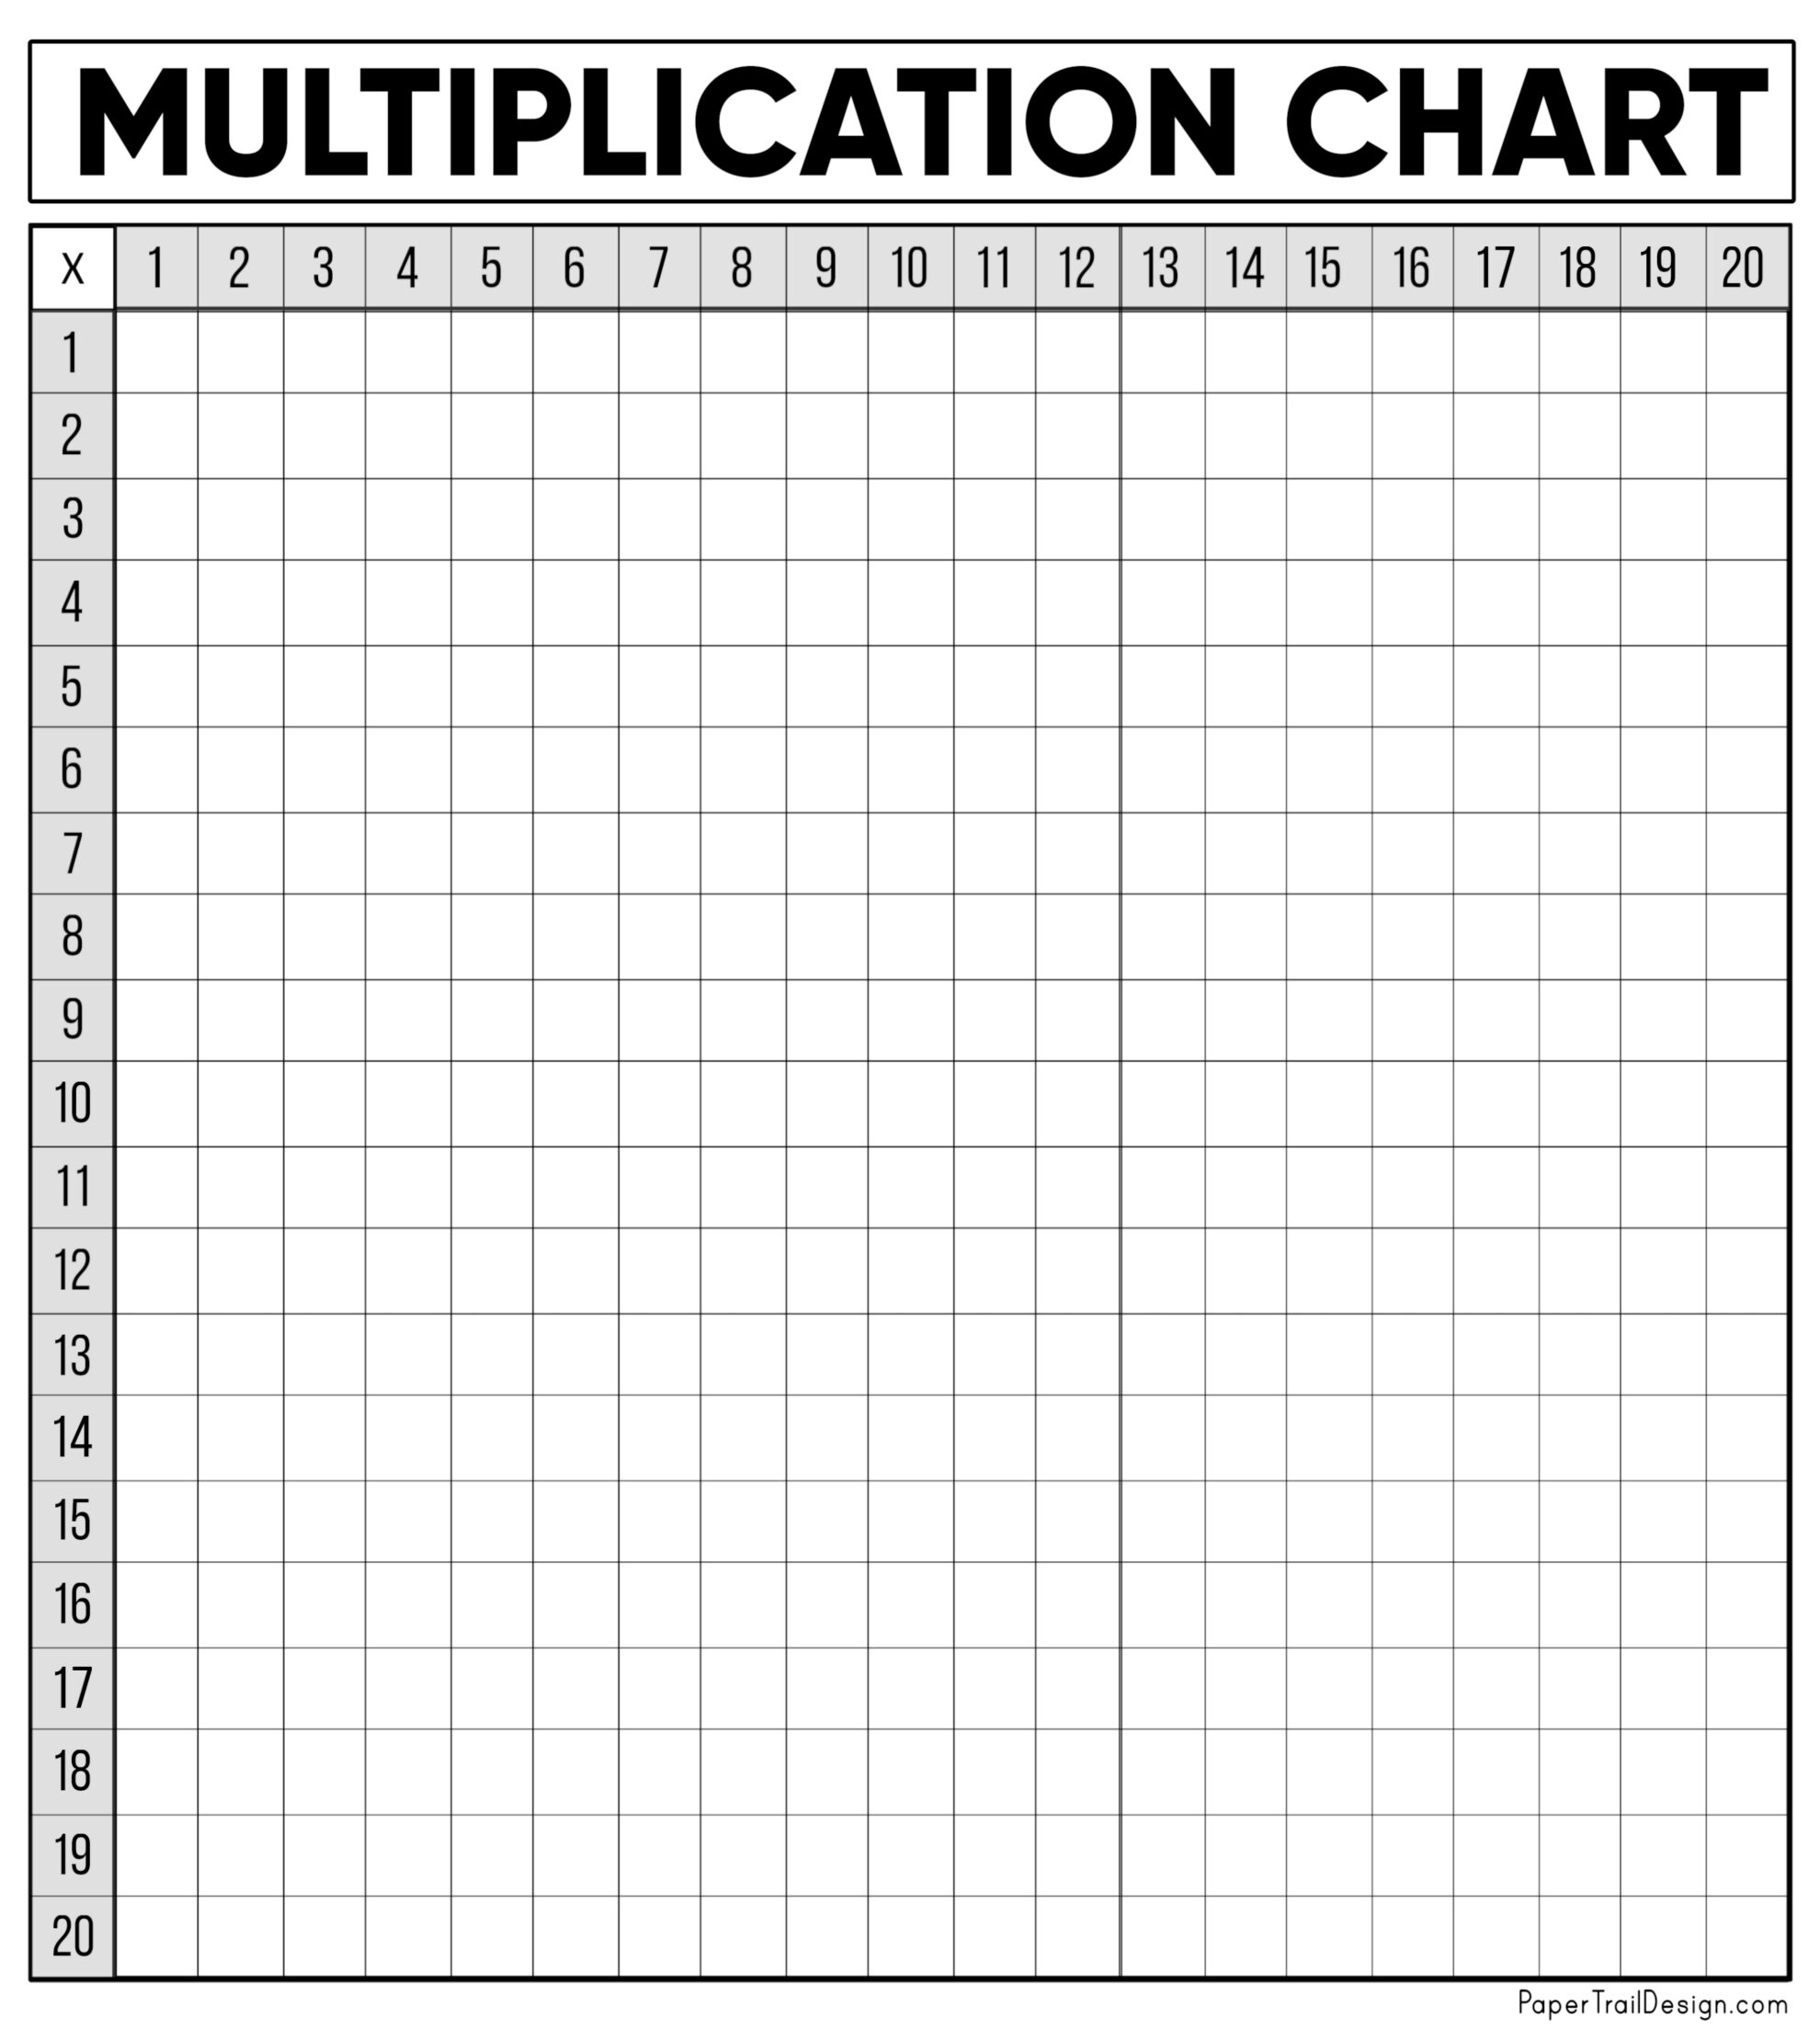 Multiplication Table To Fill In